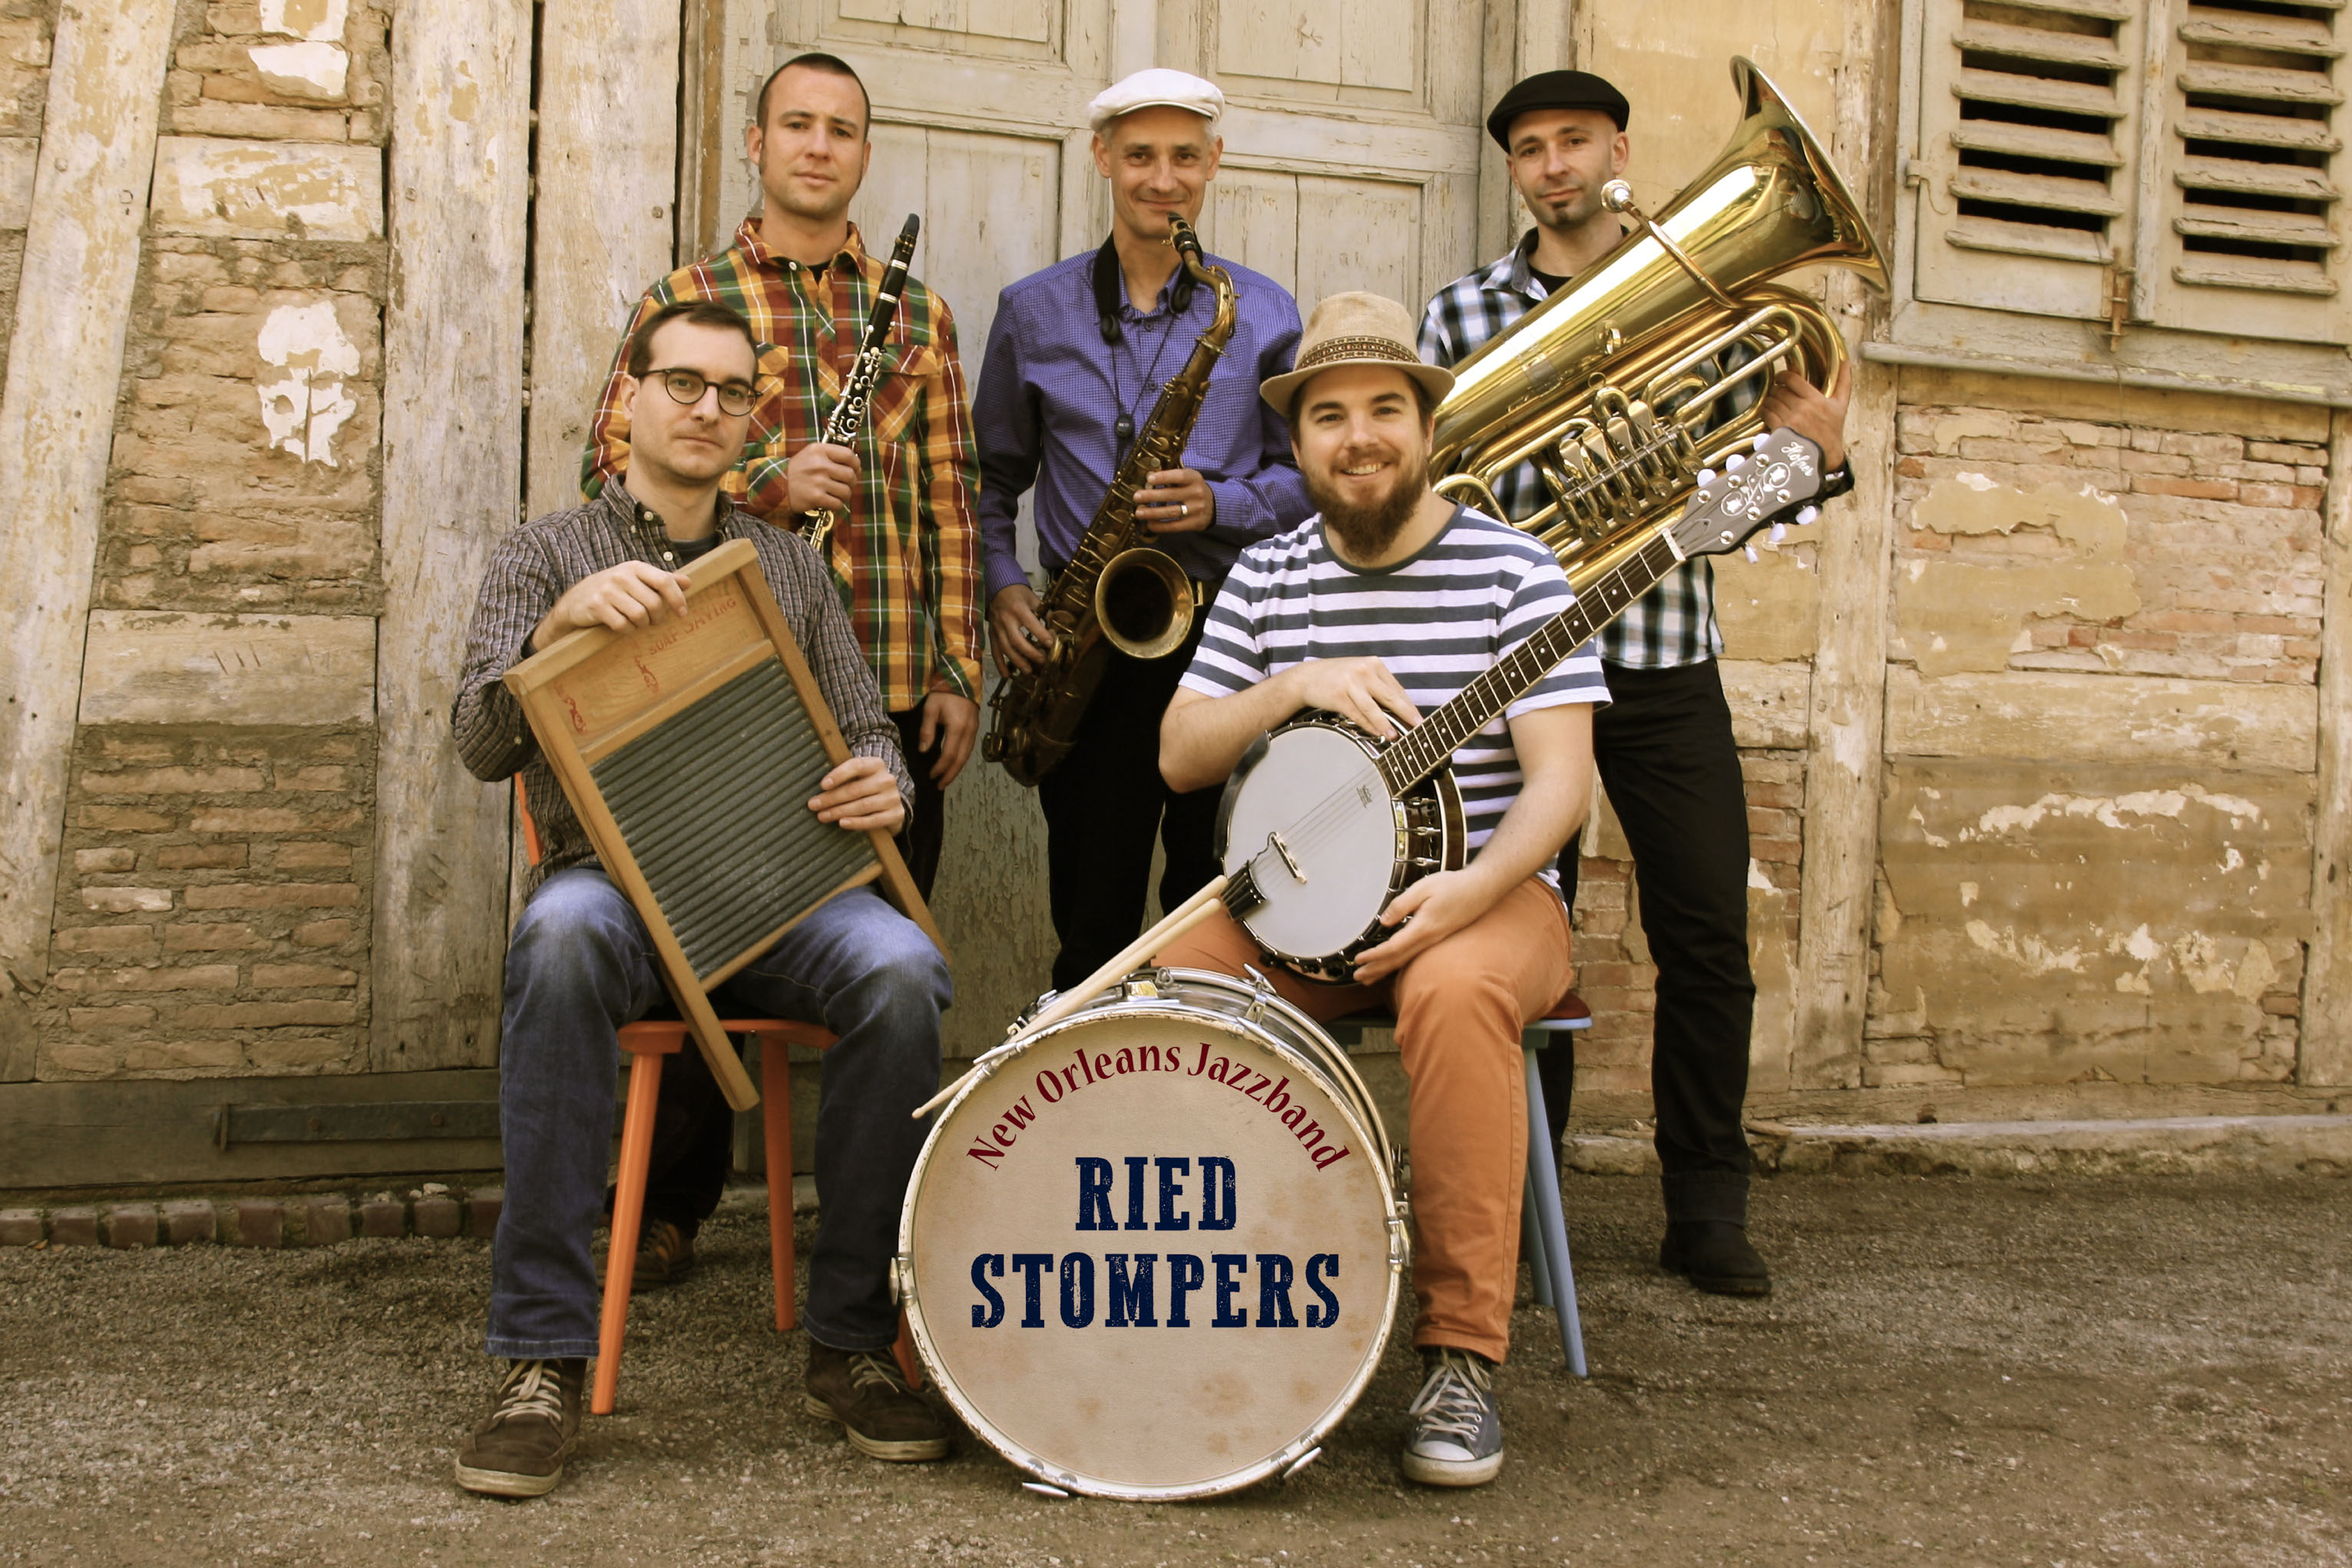 The Ried Stompers